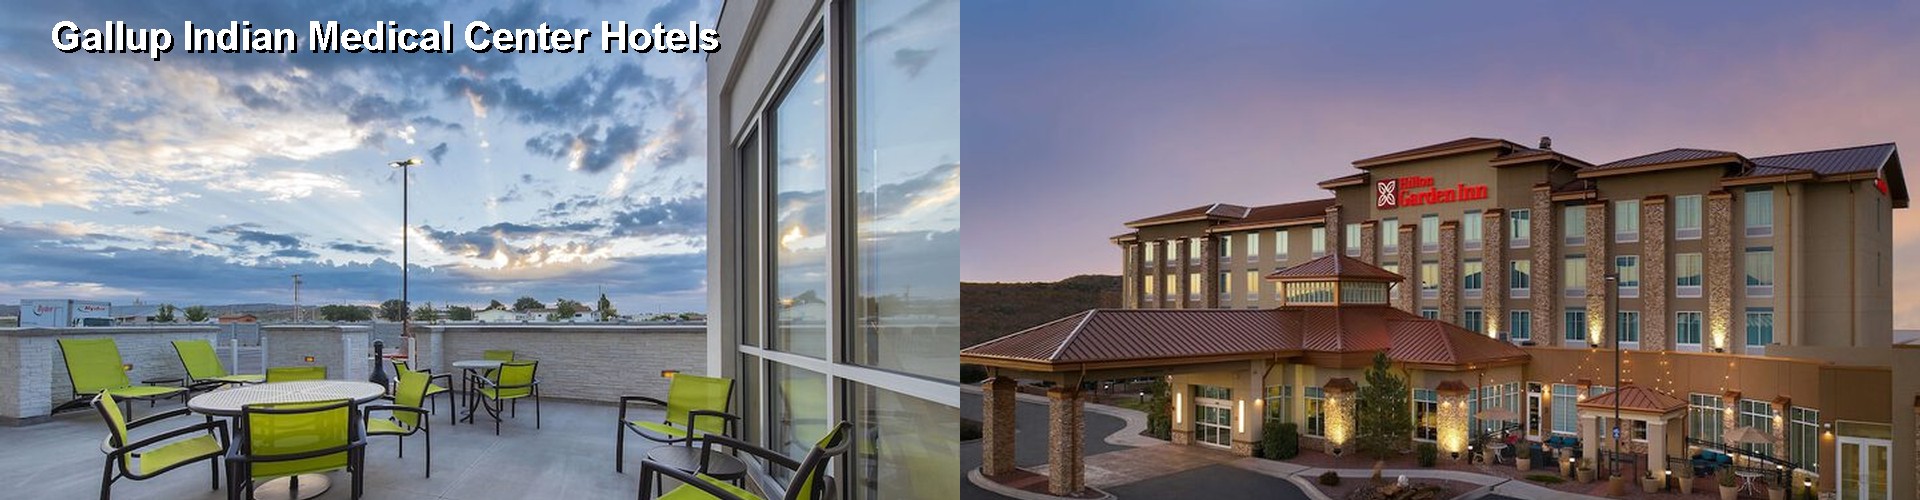 5 Best Hotels near Gallup Indian Medical Center